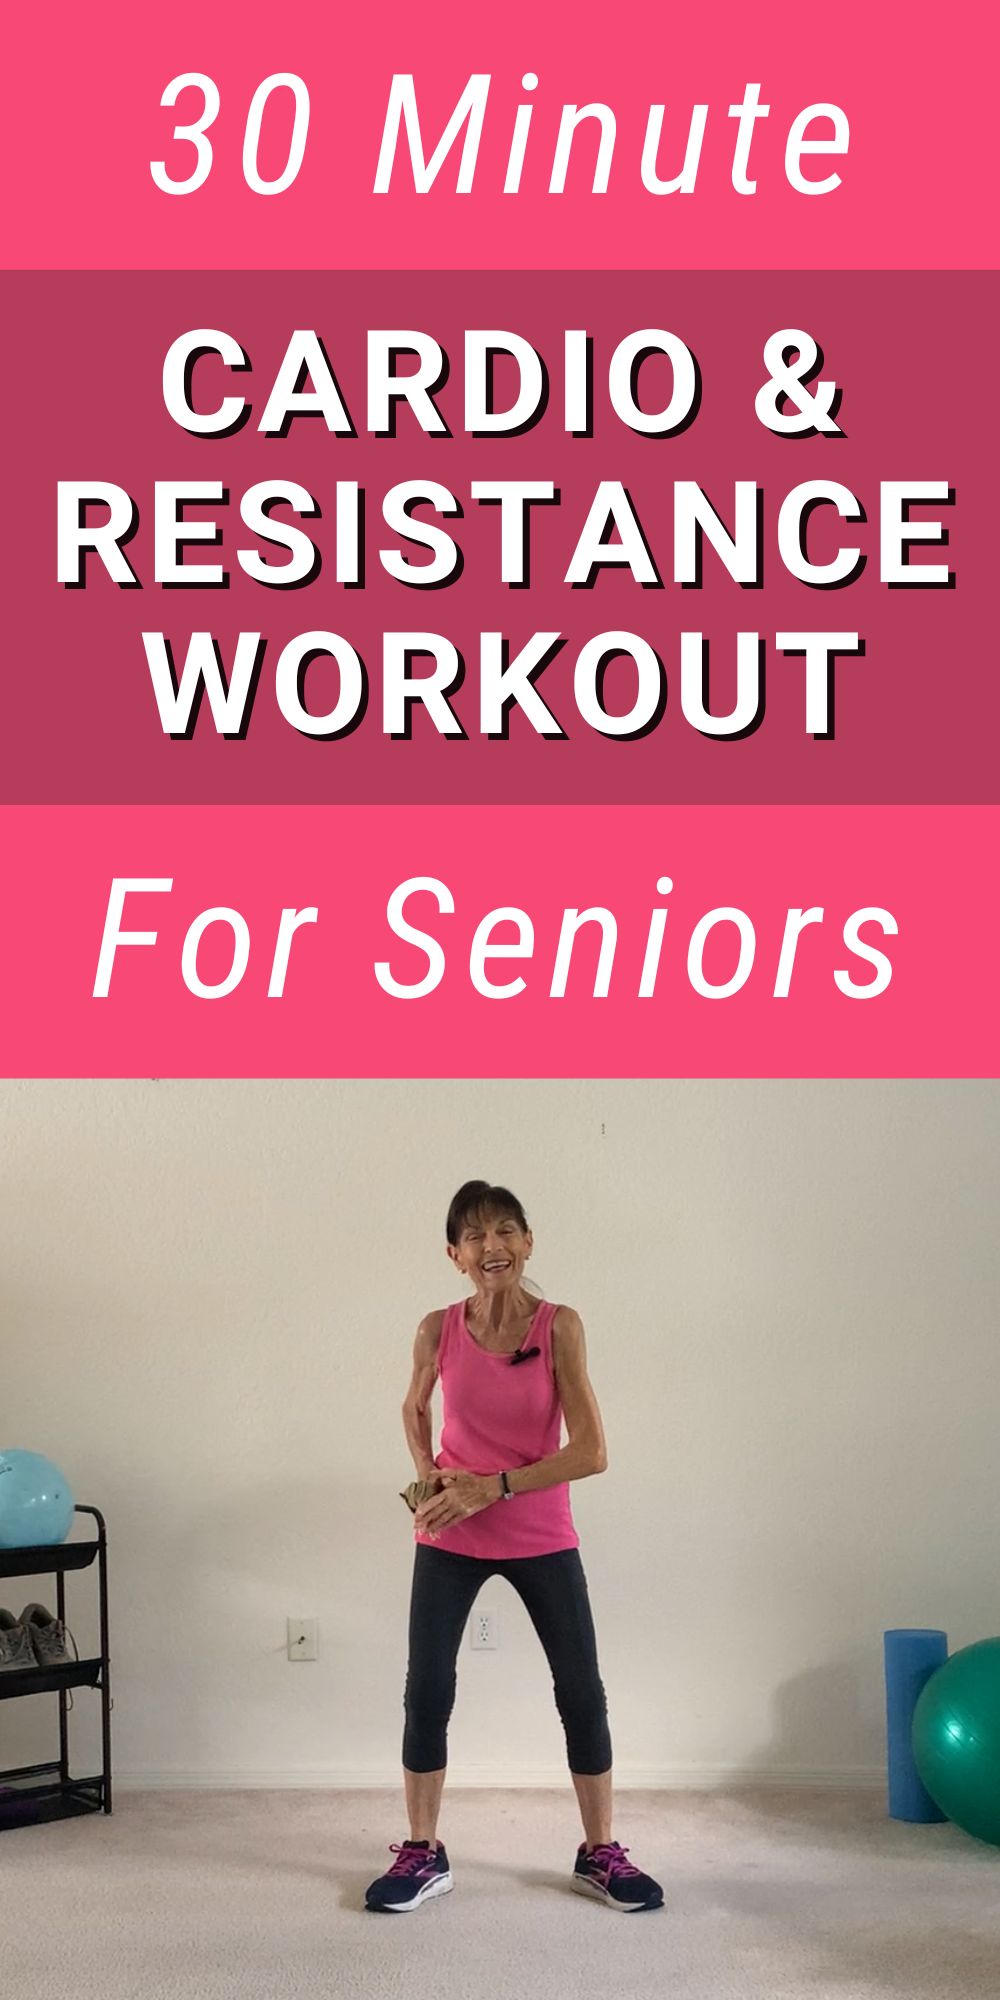 cardio and resistance workout for seniors